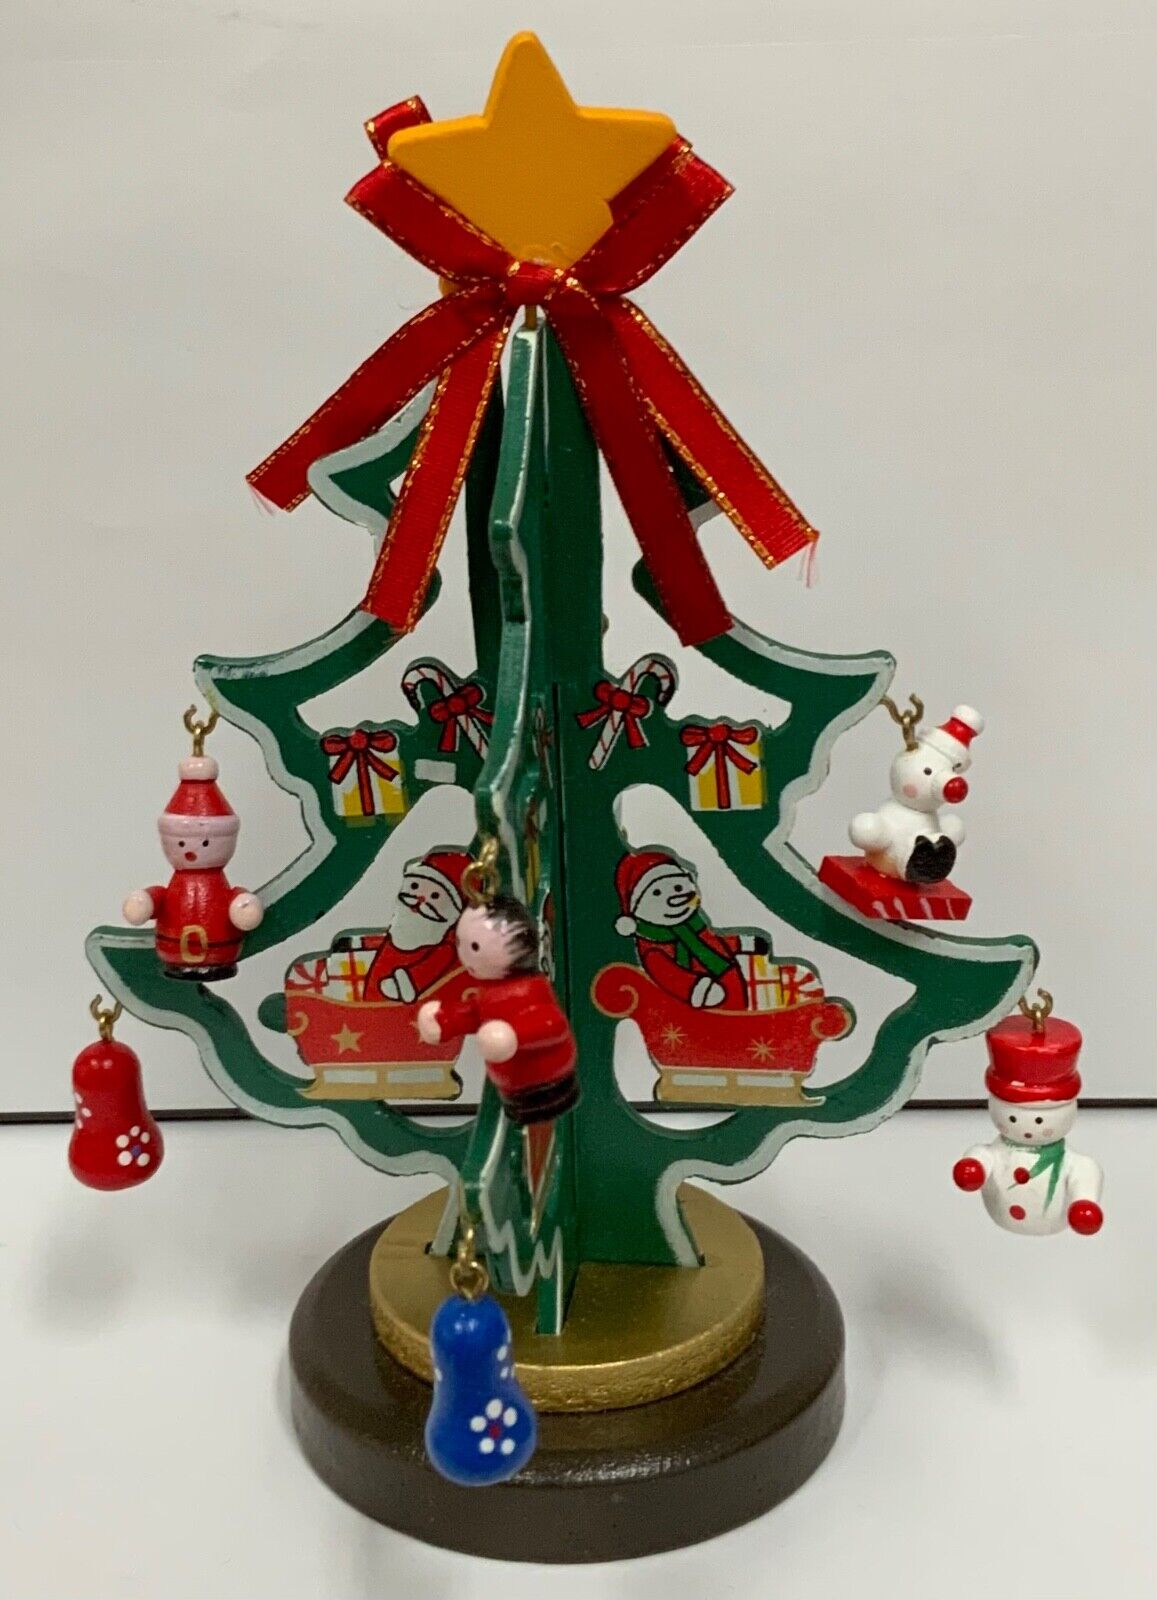 Slide Together 7 Inch Christmas Tree With Removable Wooden Ornaments